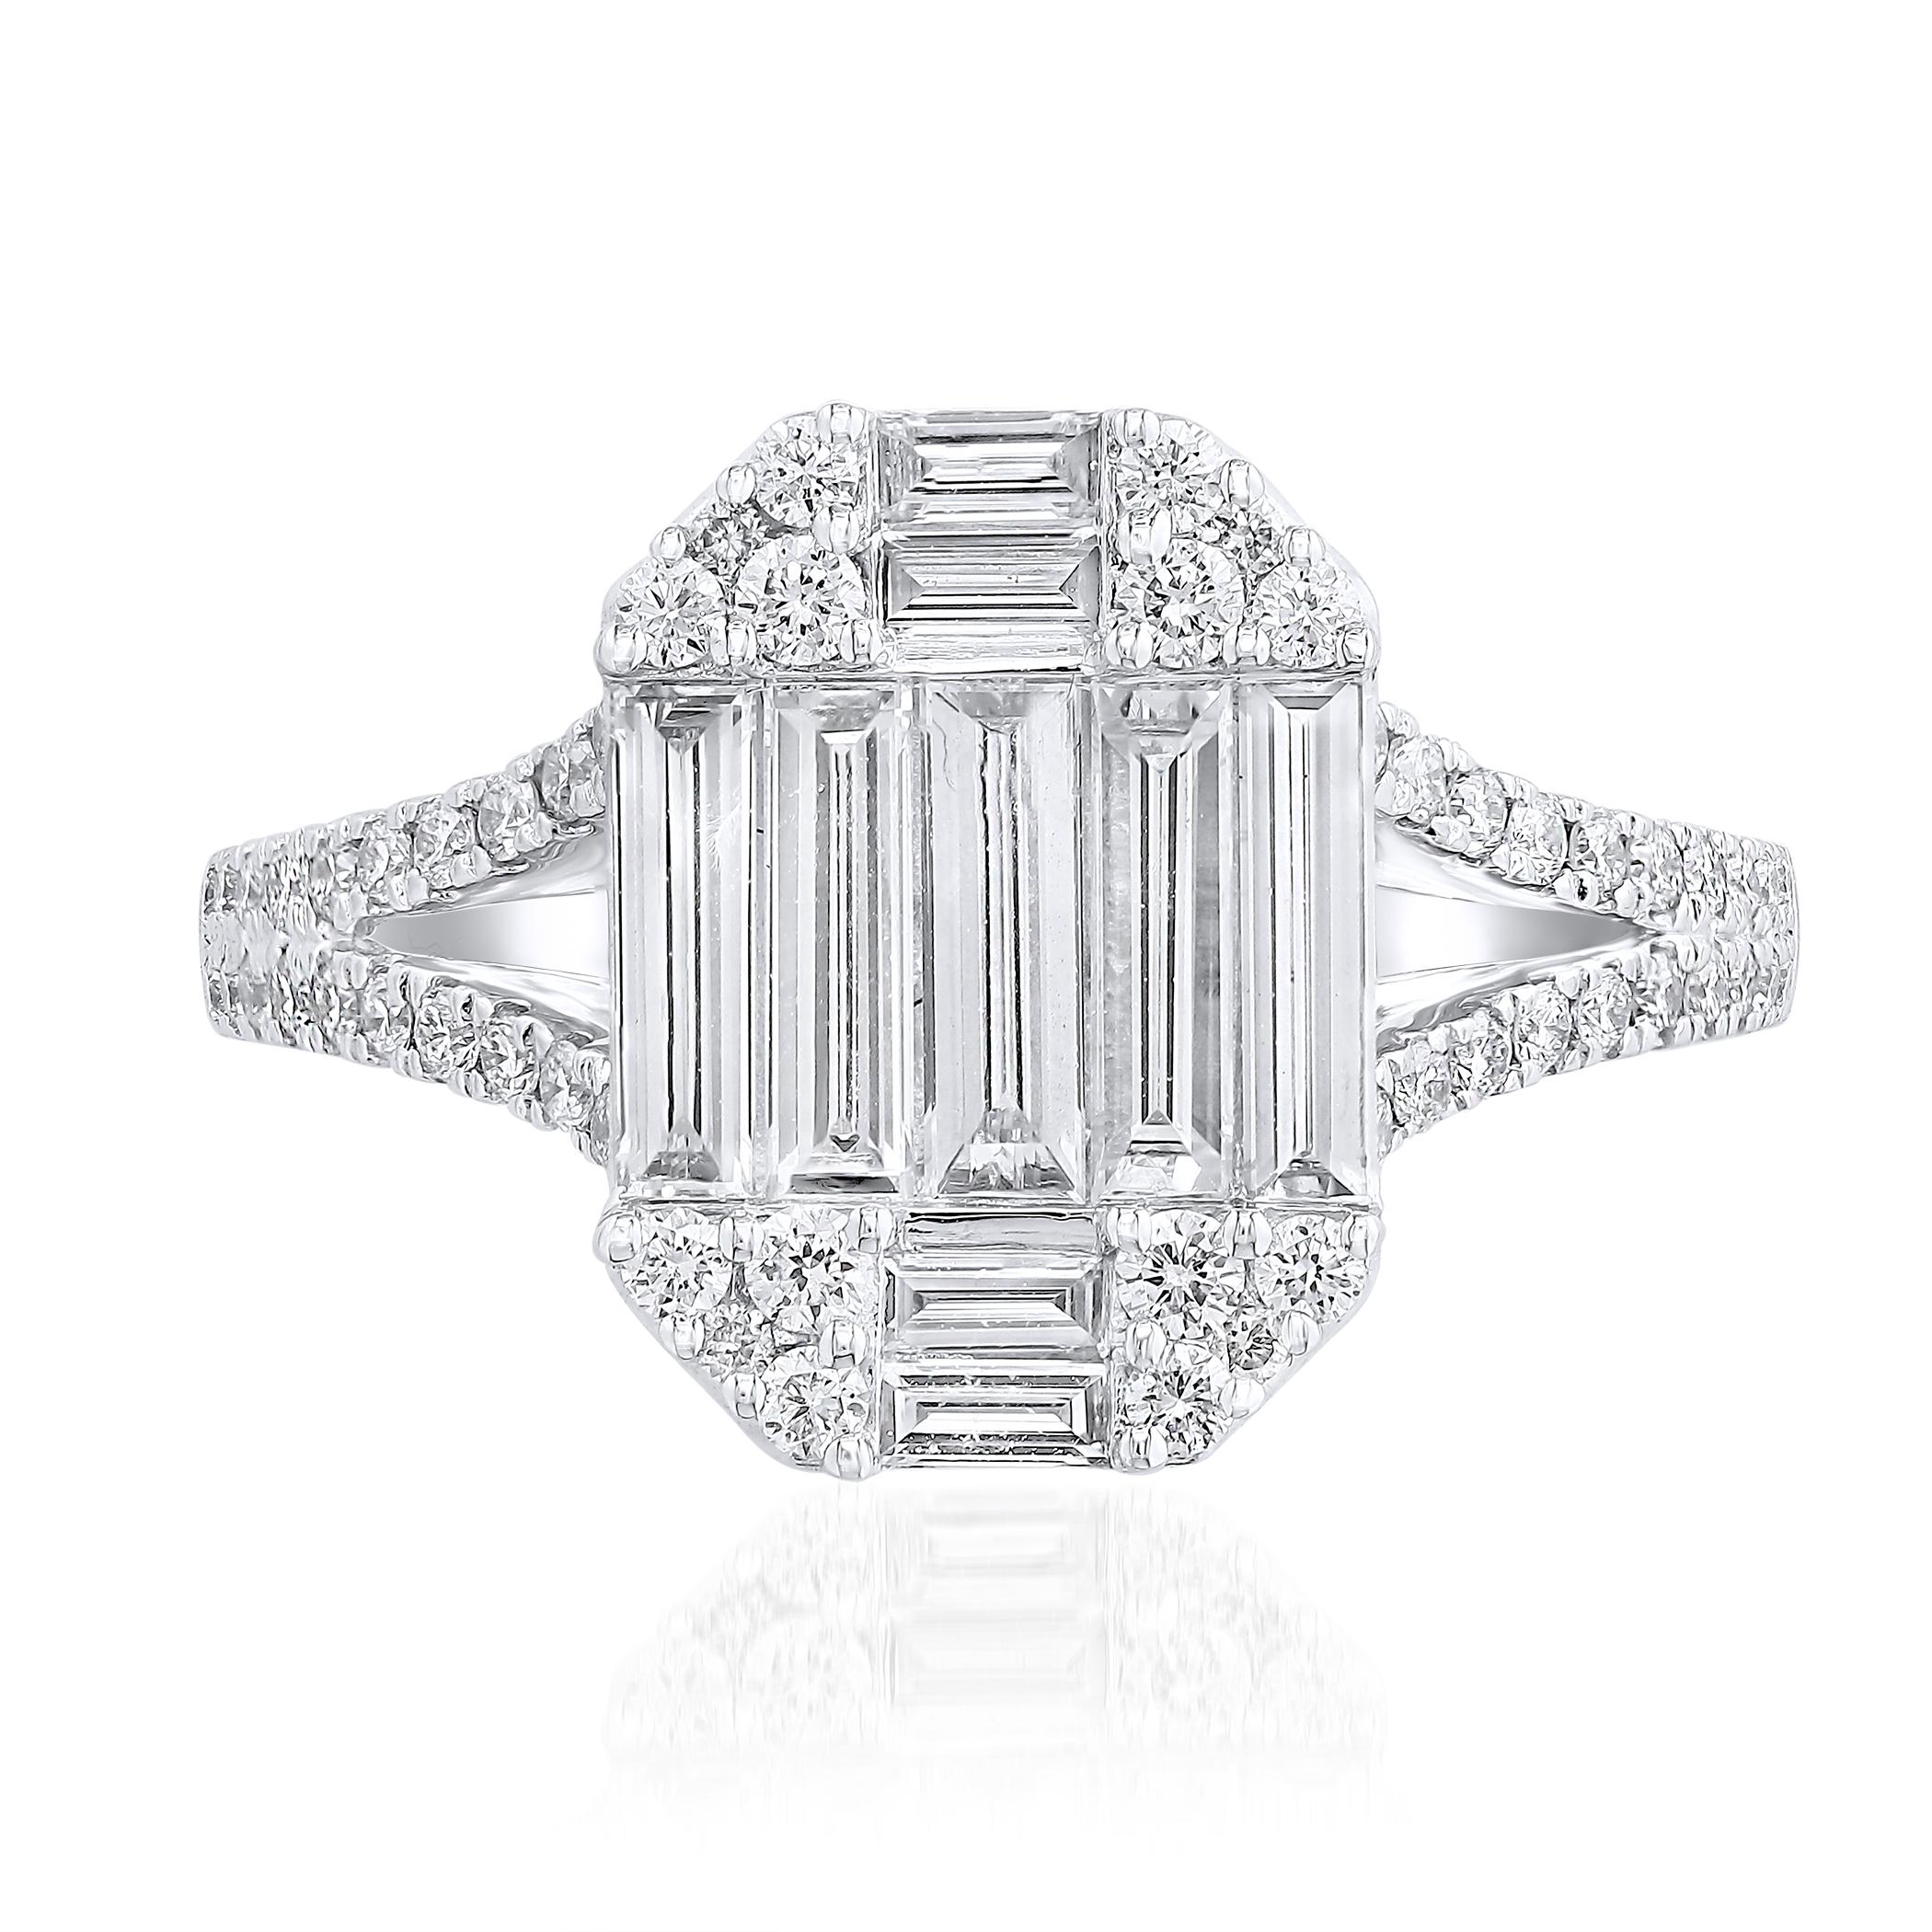 A brilliant and unique piece featuring a cluster of baguette diamonds shaped like an emerald cut, and a split shank setting accented with diamonds.. 10 Baguette diamonds weigh 0.86 carats total; 56 round diamonds weigh 0.41 carats total. Made in 18k